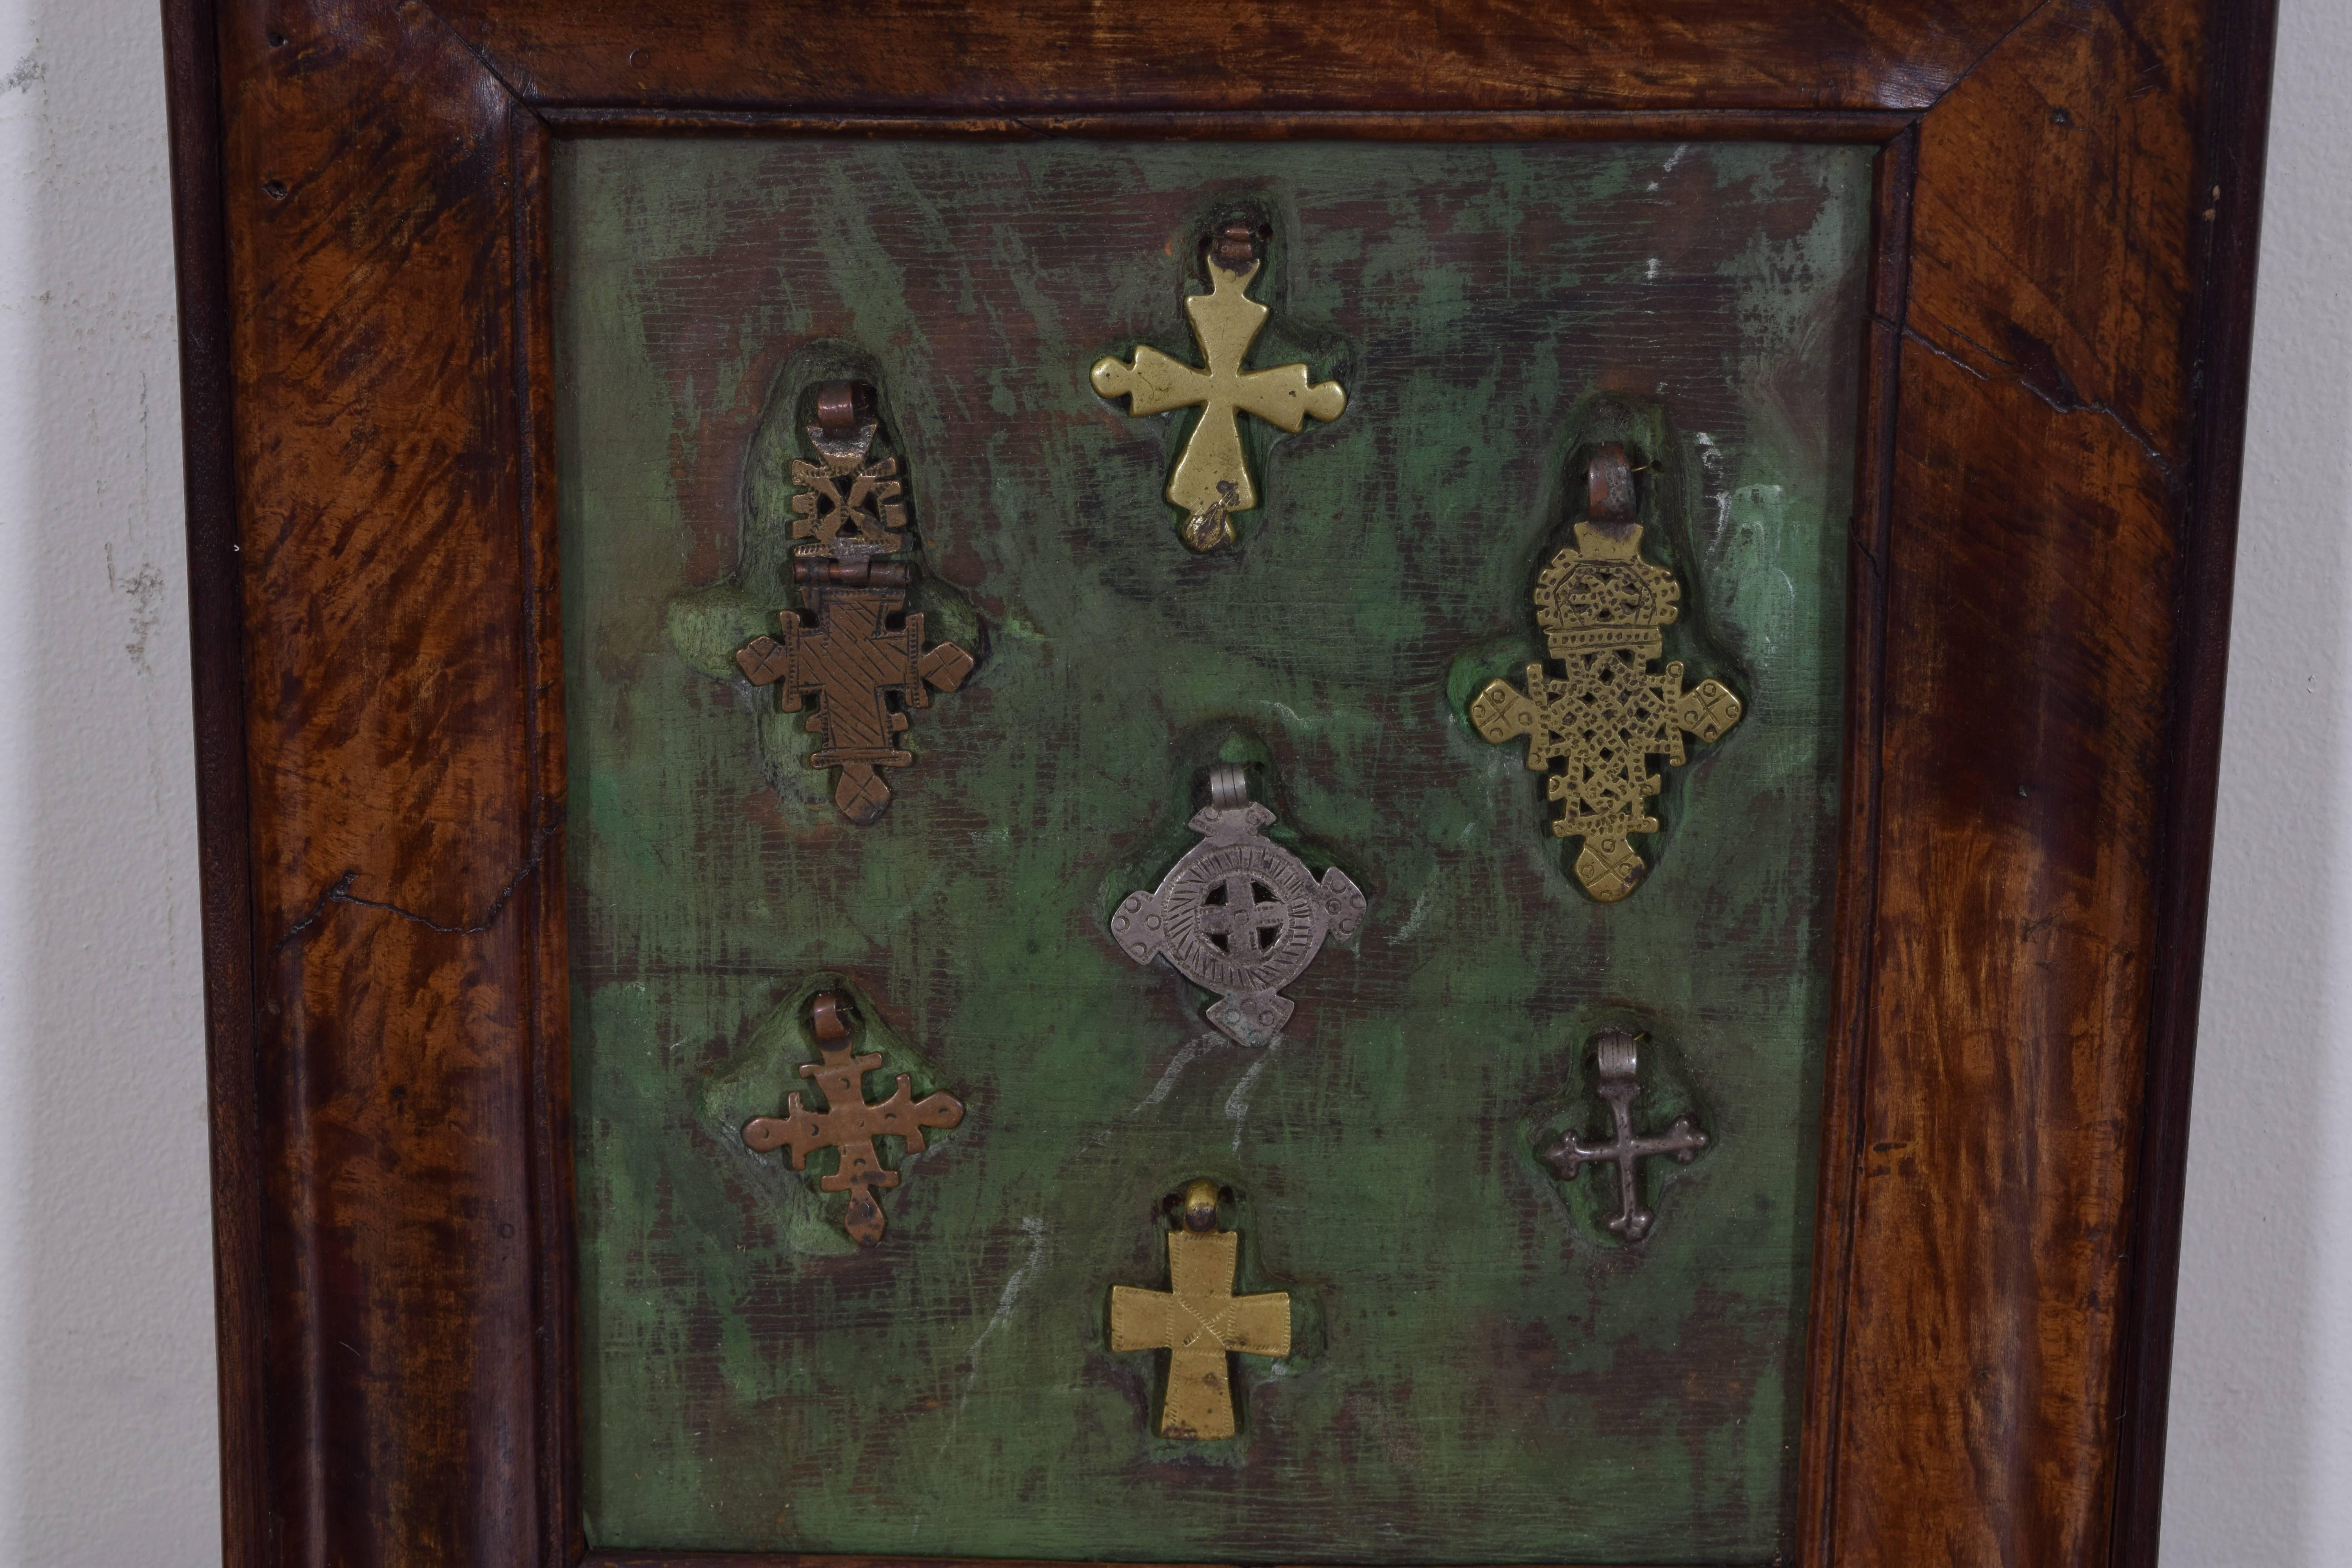 Framed in an Italian walnut frame; the crosses are suspended and recessed on a green fabric ground.